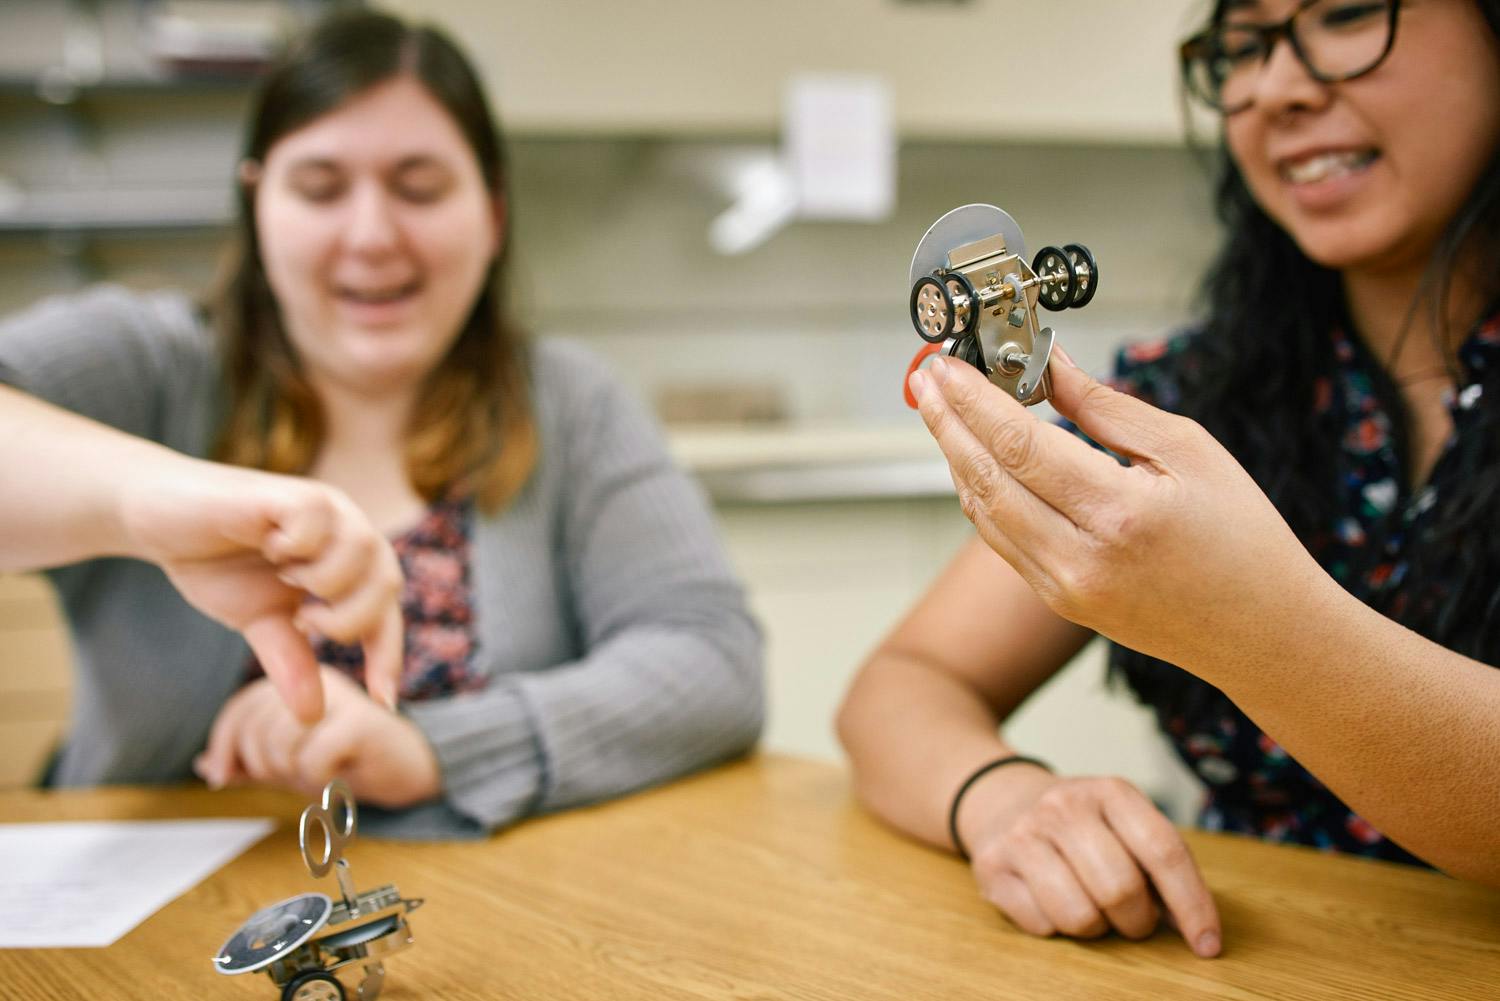 SPU’s physics education research is helping students of all ages to think like scientists